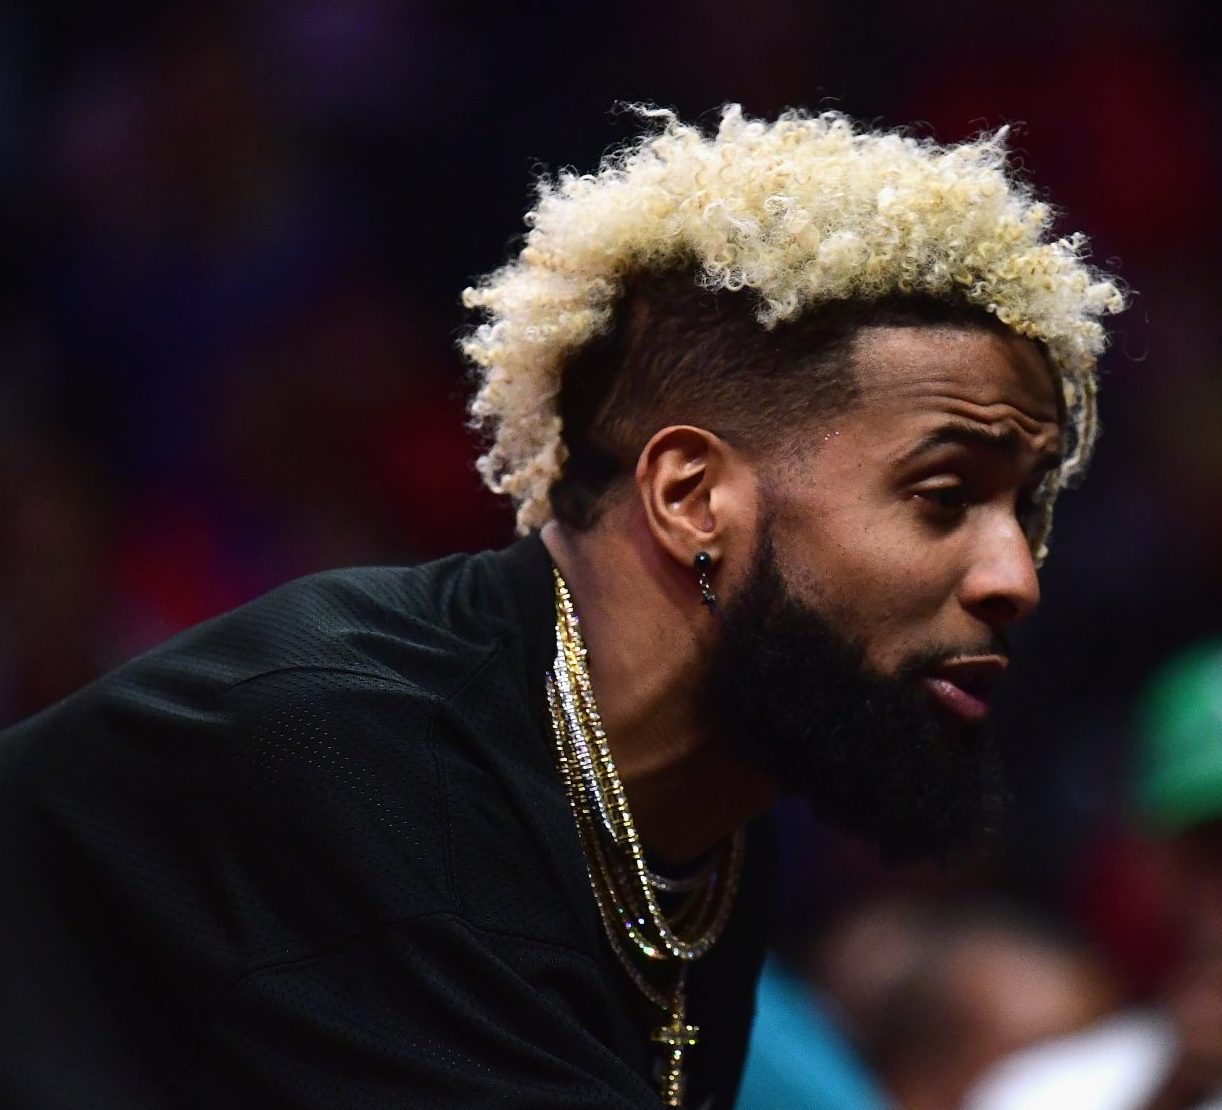 Man Claims Odell Beckham Jr Offered A Woman 1000 For Sex The Latest